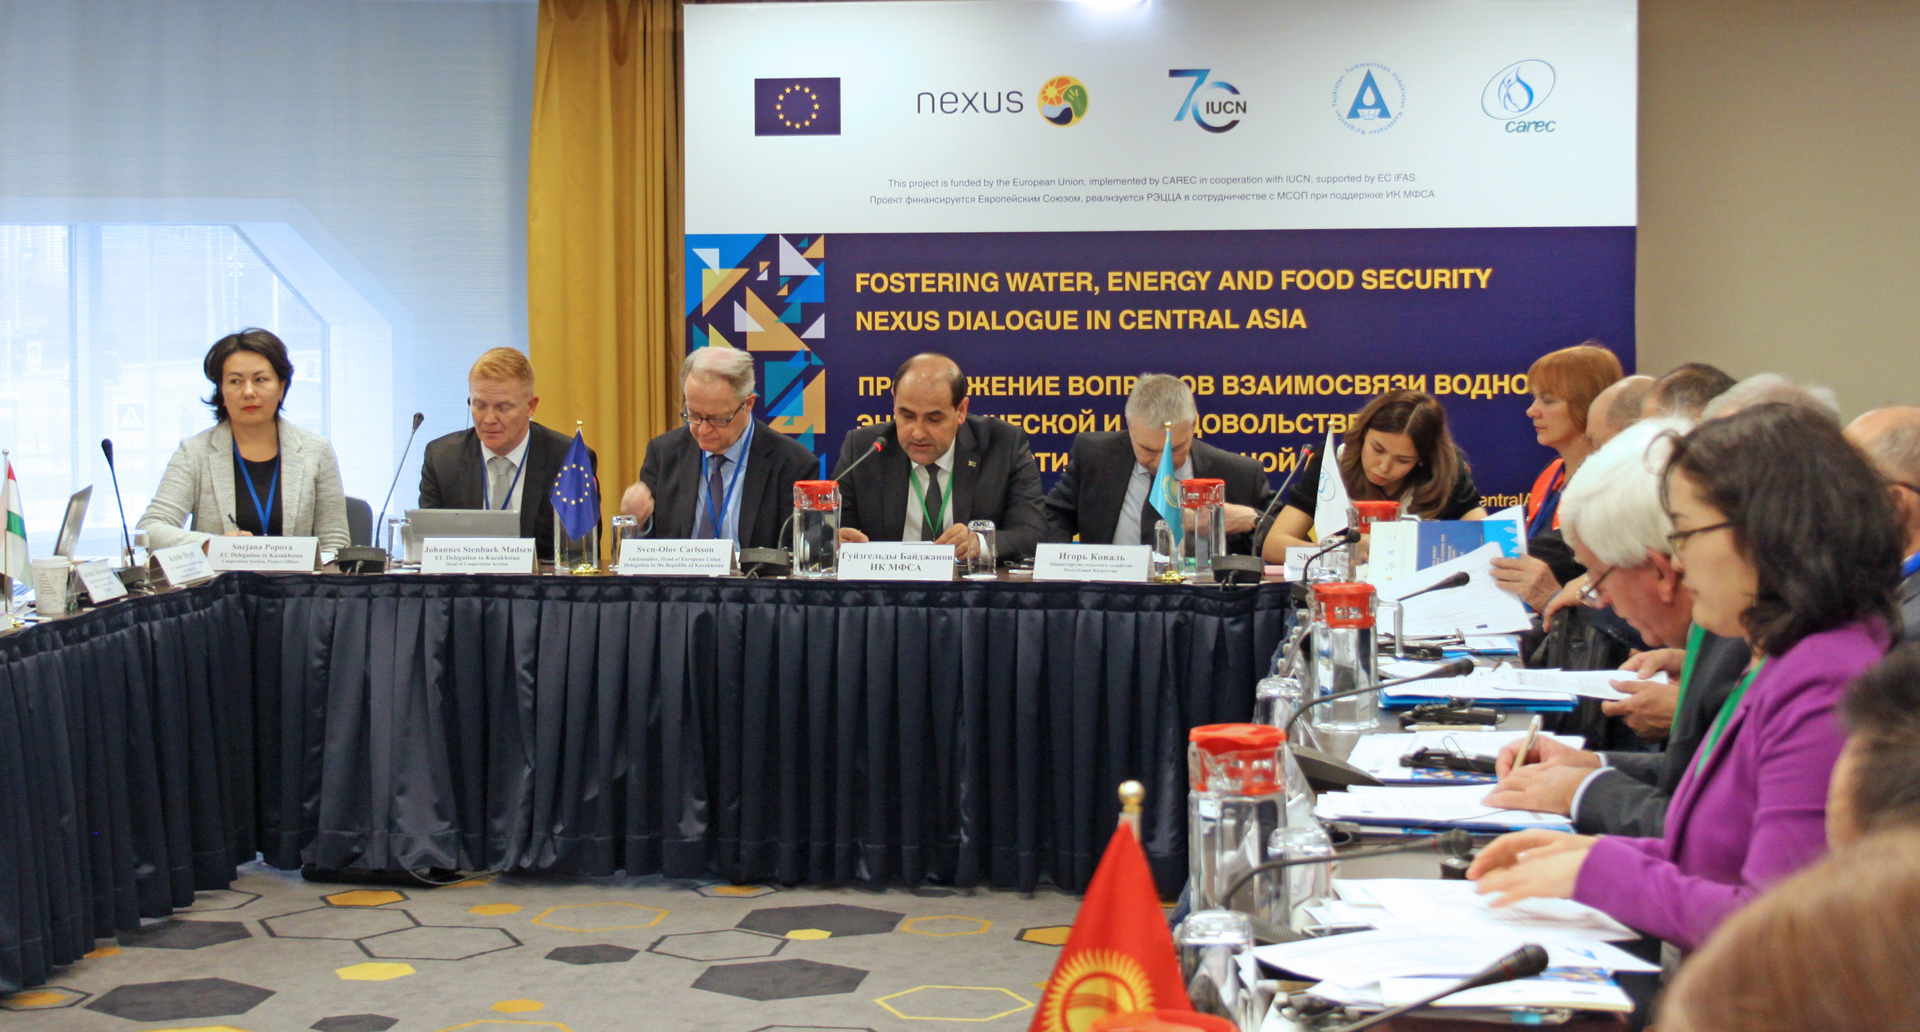 Investment projects to foster water, energy and food security in Central Asia were discussed in Astana